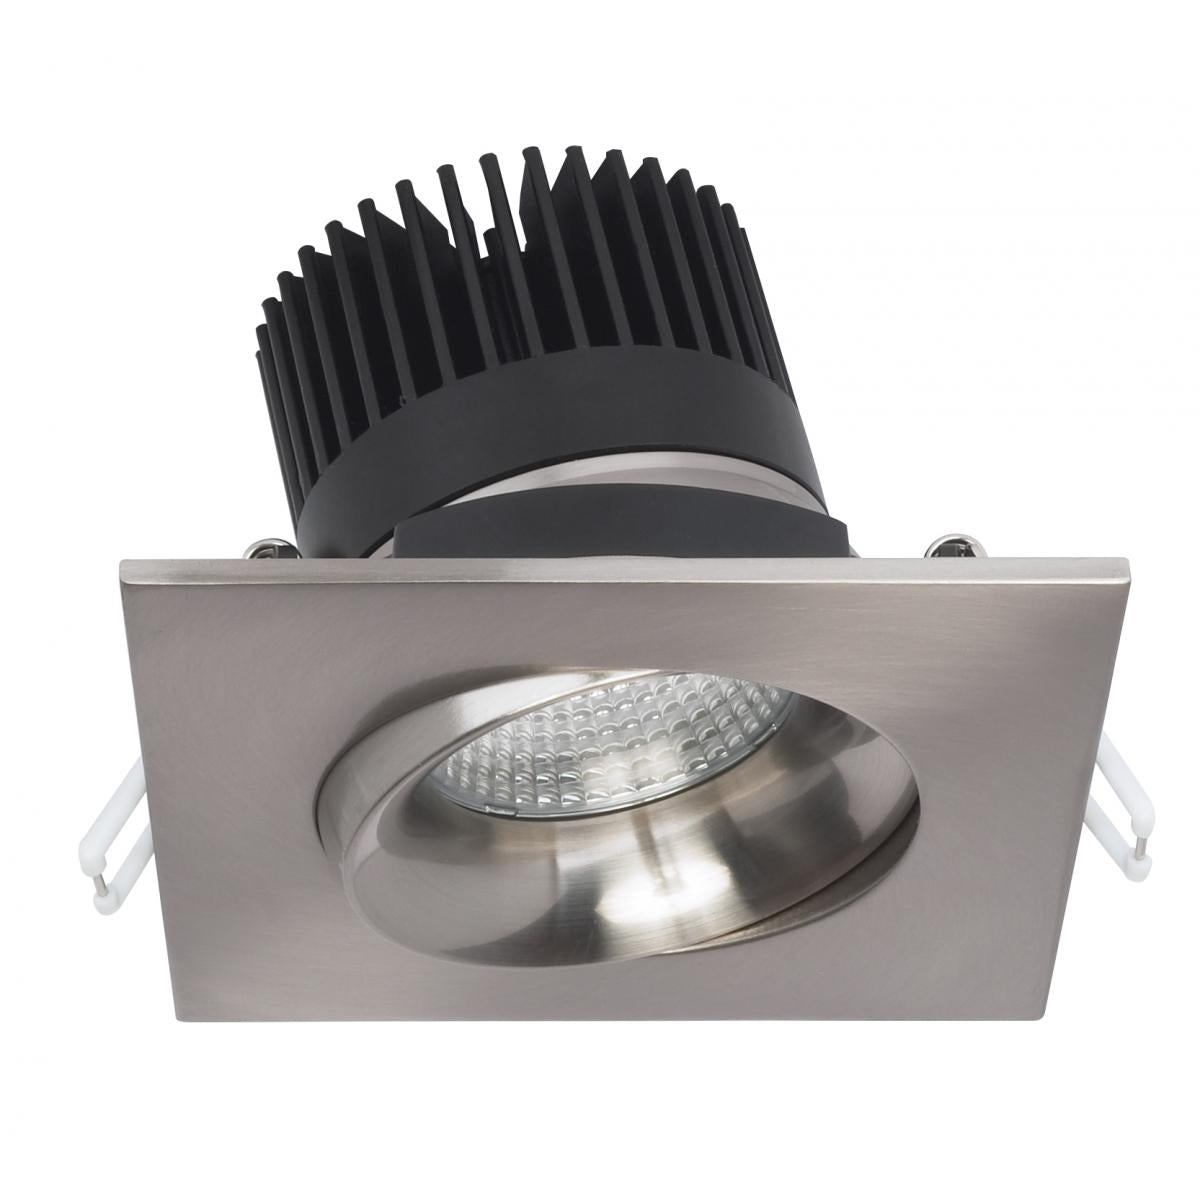 SATCO-S11629SATCO S11627 12W LED Square Recessed GIMBALED Direct Wire Downlight 3.5" 30K